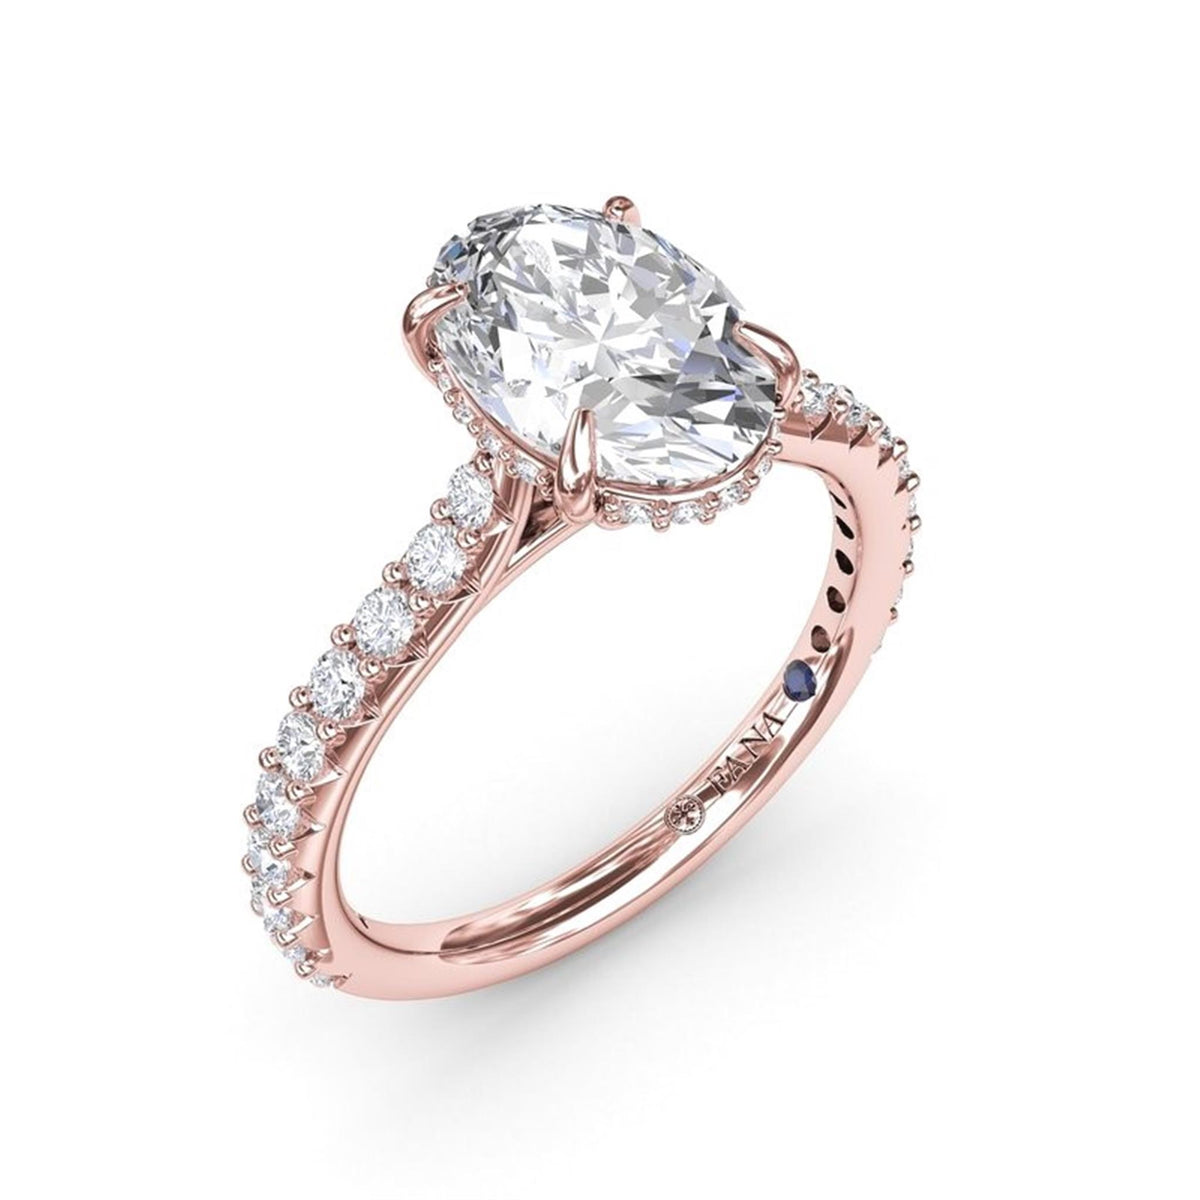 14Kt Rose Gold Classic Prong Engagement Ring Mounting With 0.48cttw Natural Diamonds